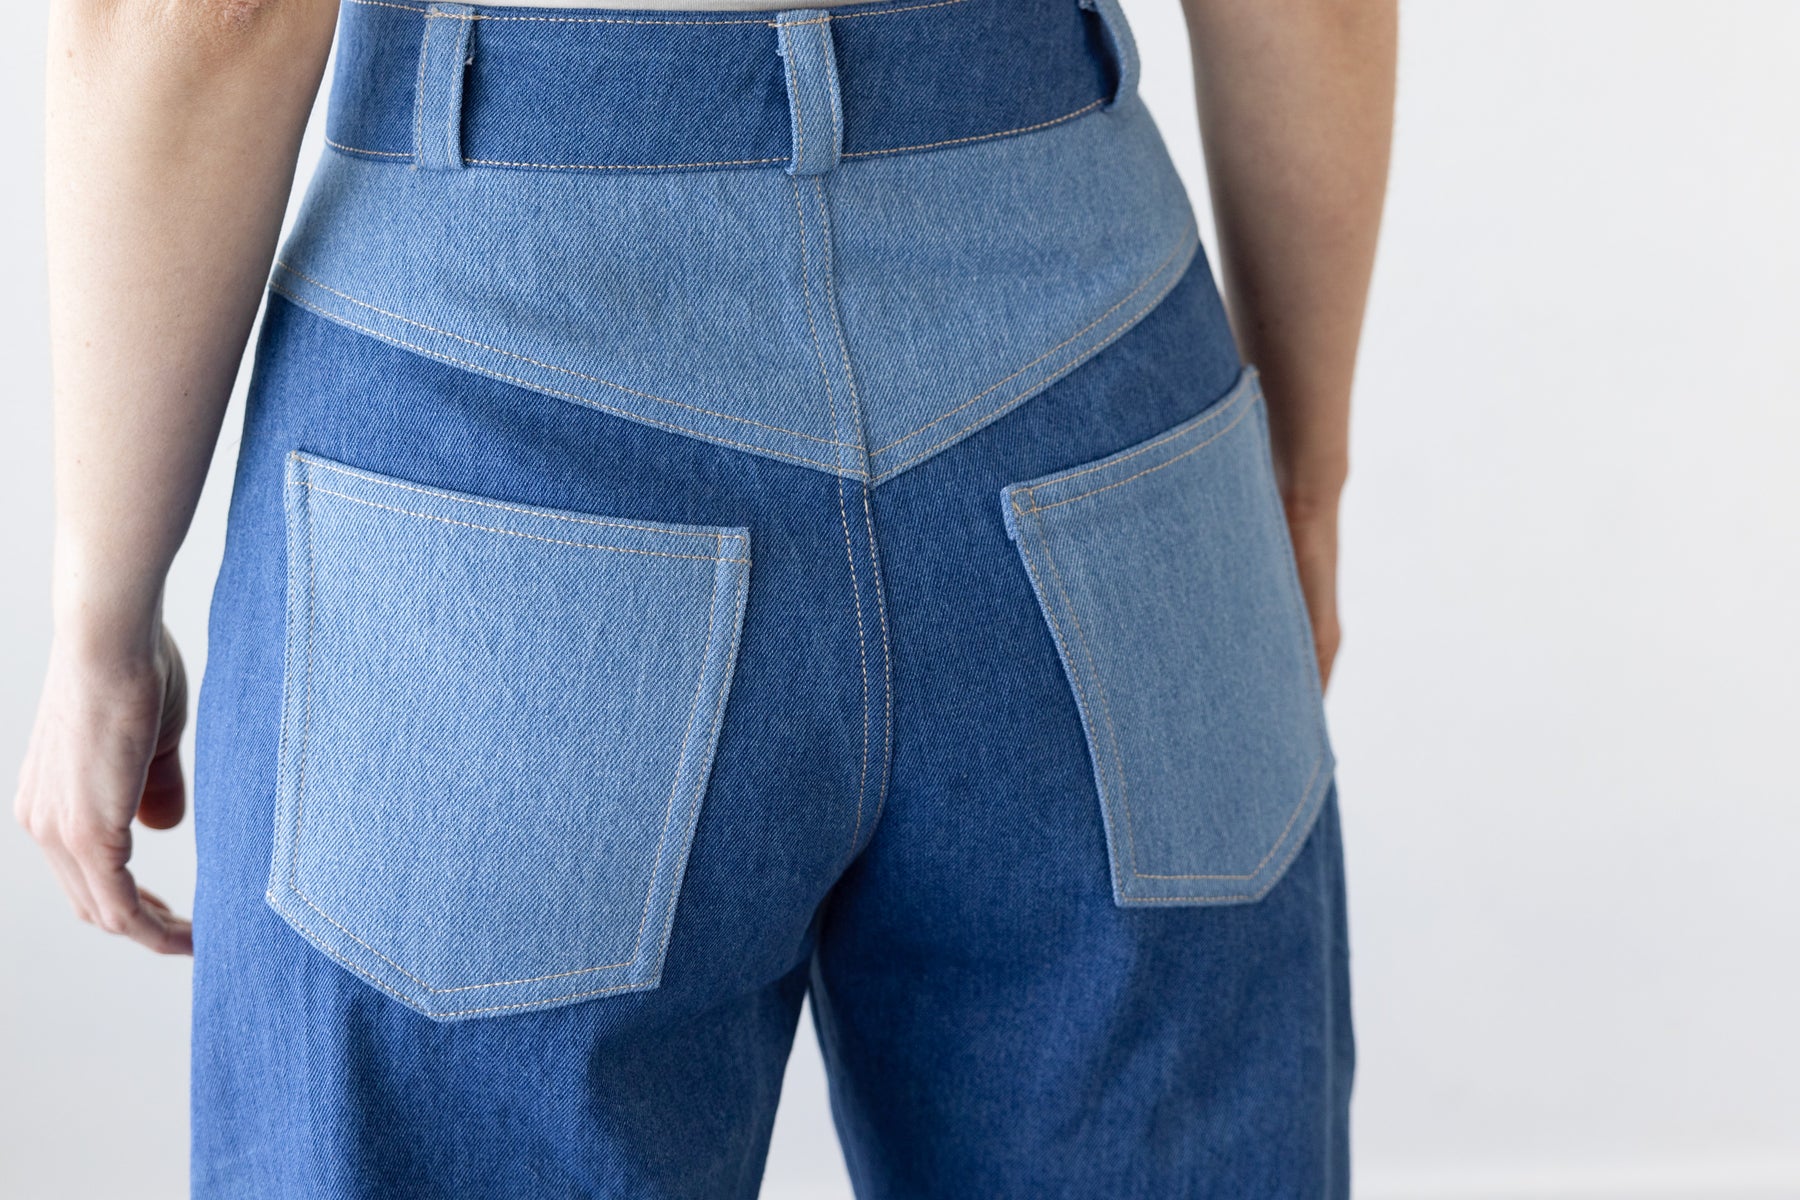 Buttress Jeans Online Course